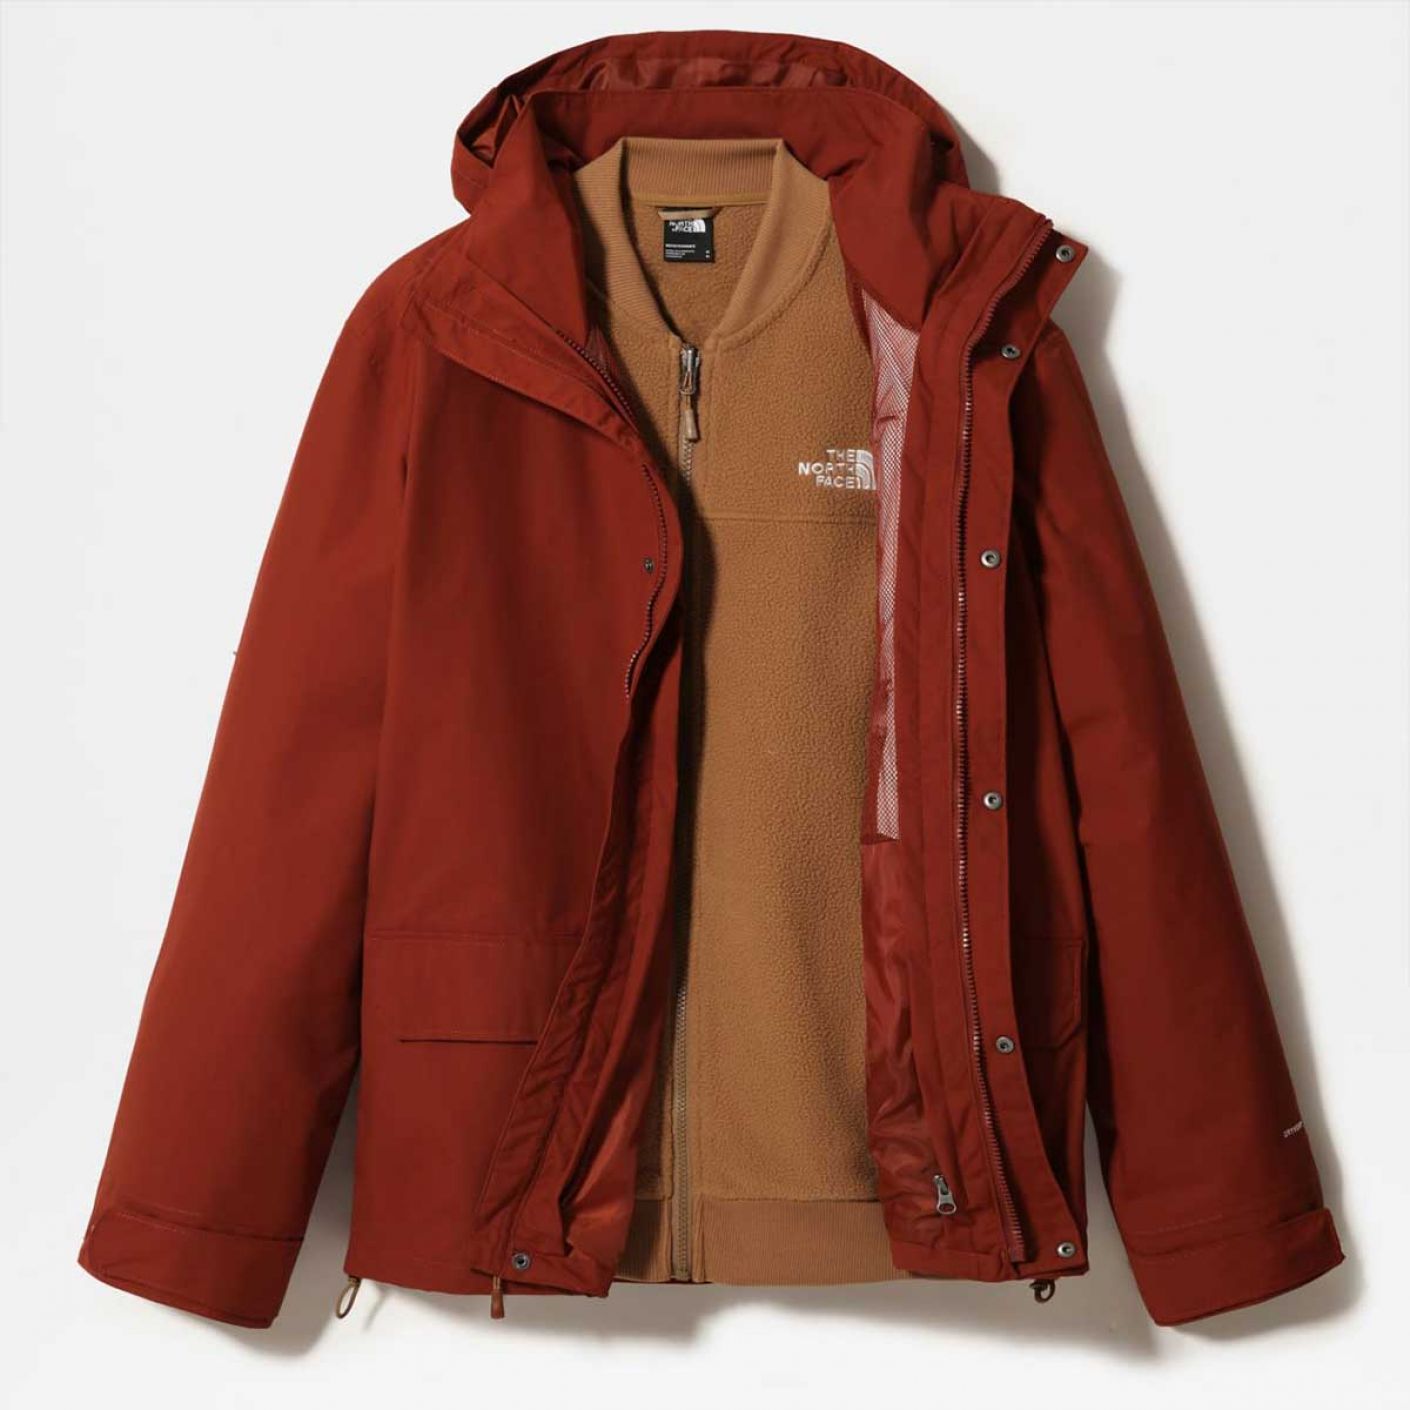 The North Face Men's Pinecroft Triclimate Brandy Brown-Utility Brown Jacket